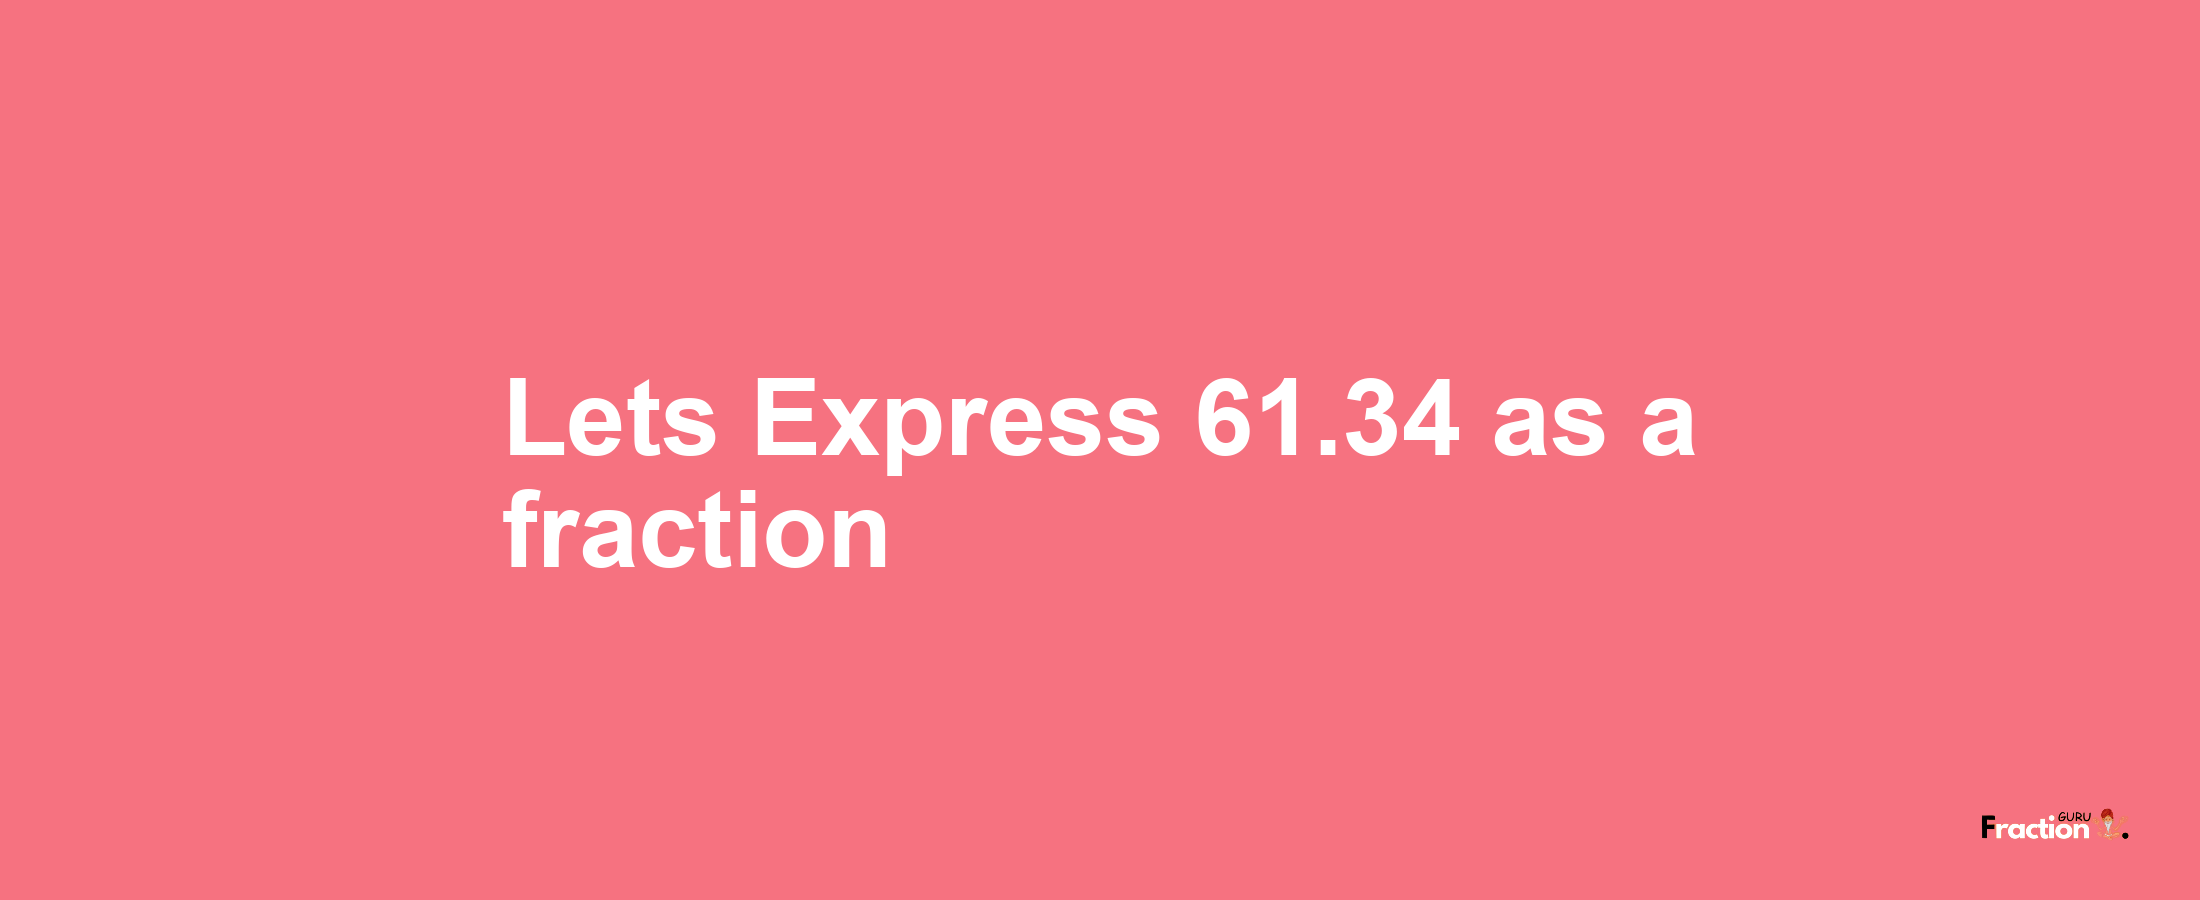 Lets Express 61.34 as afraction